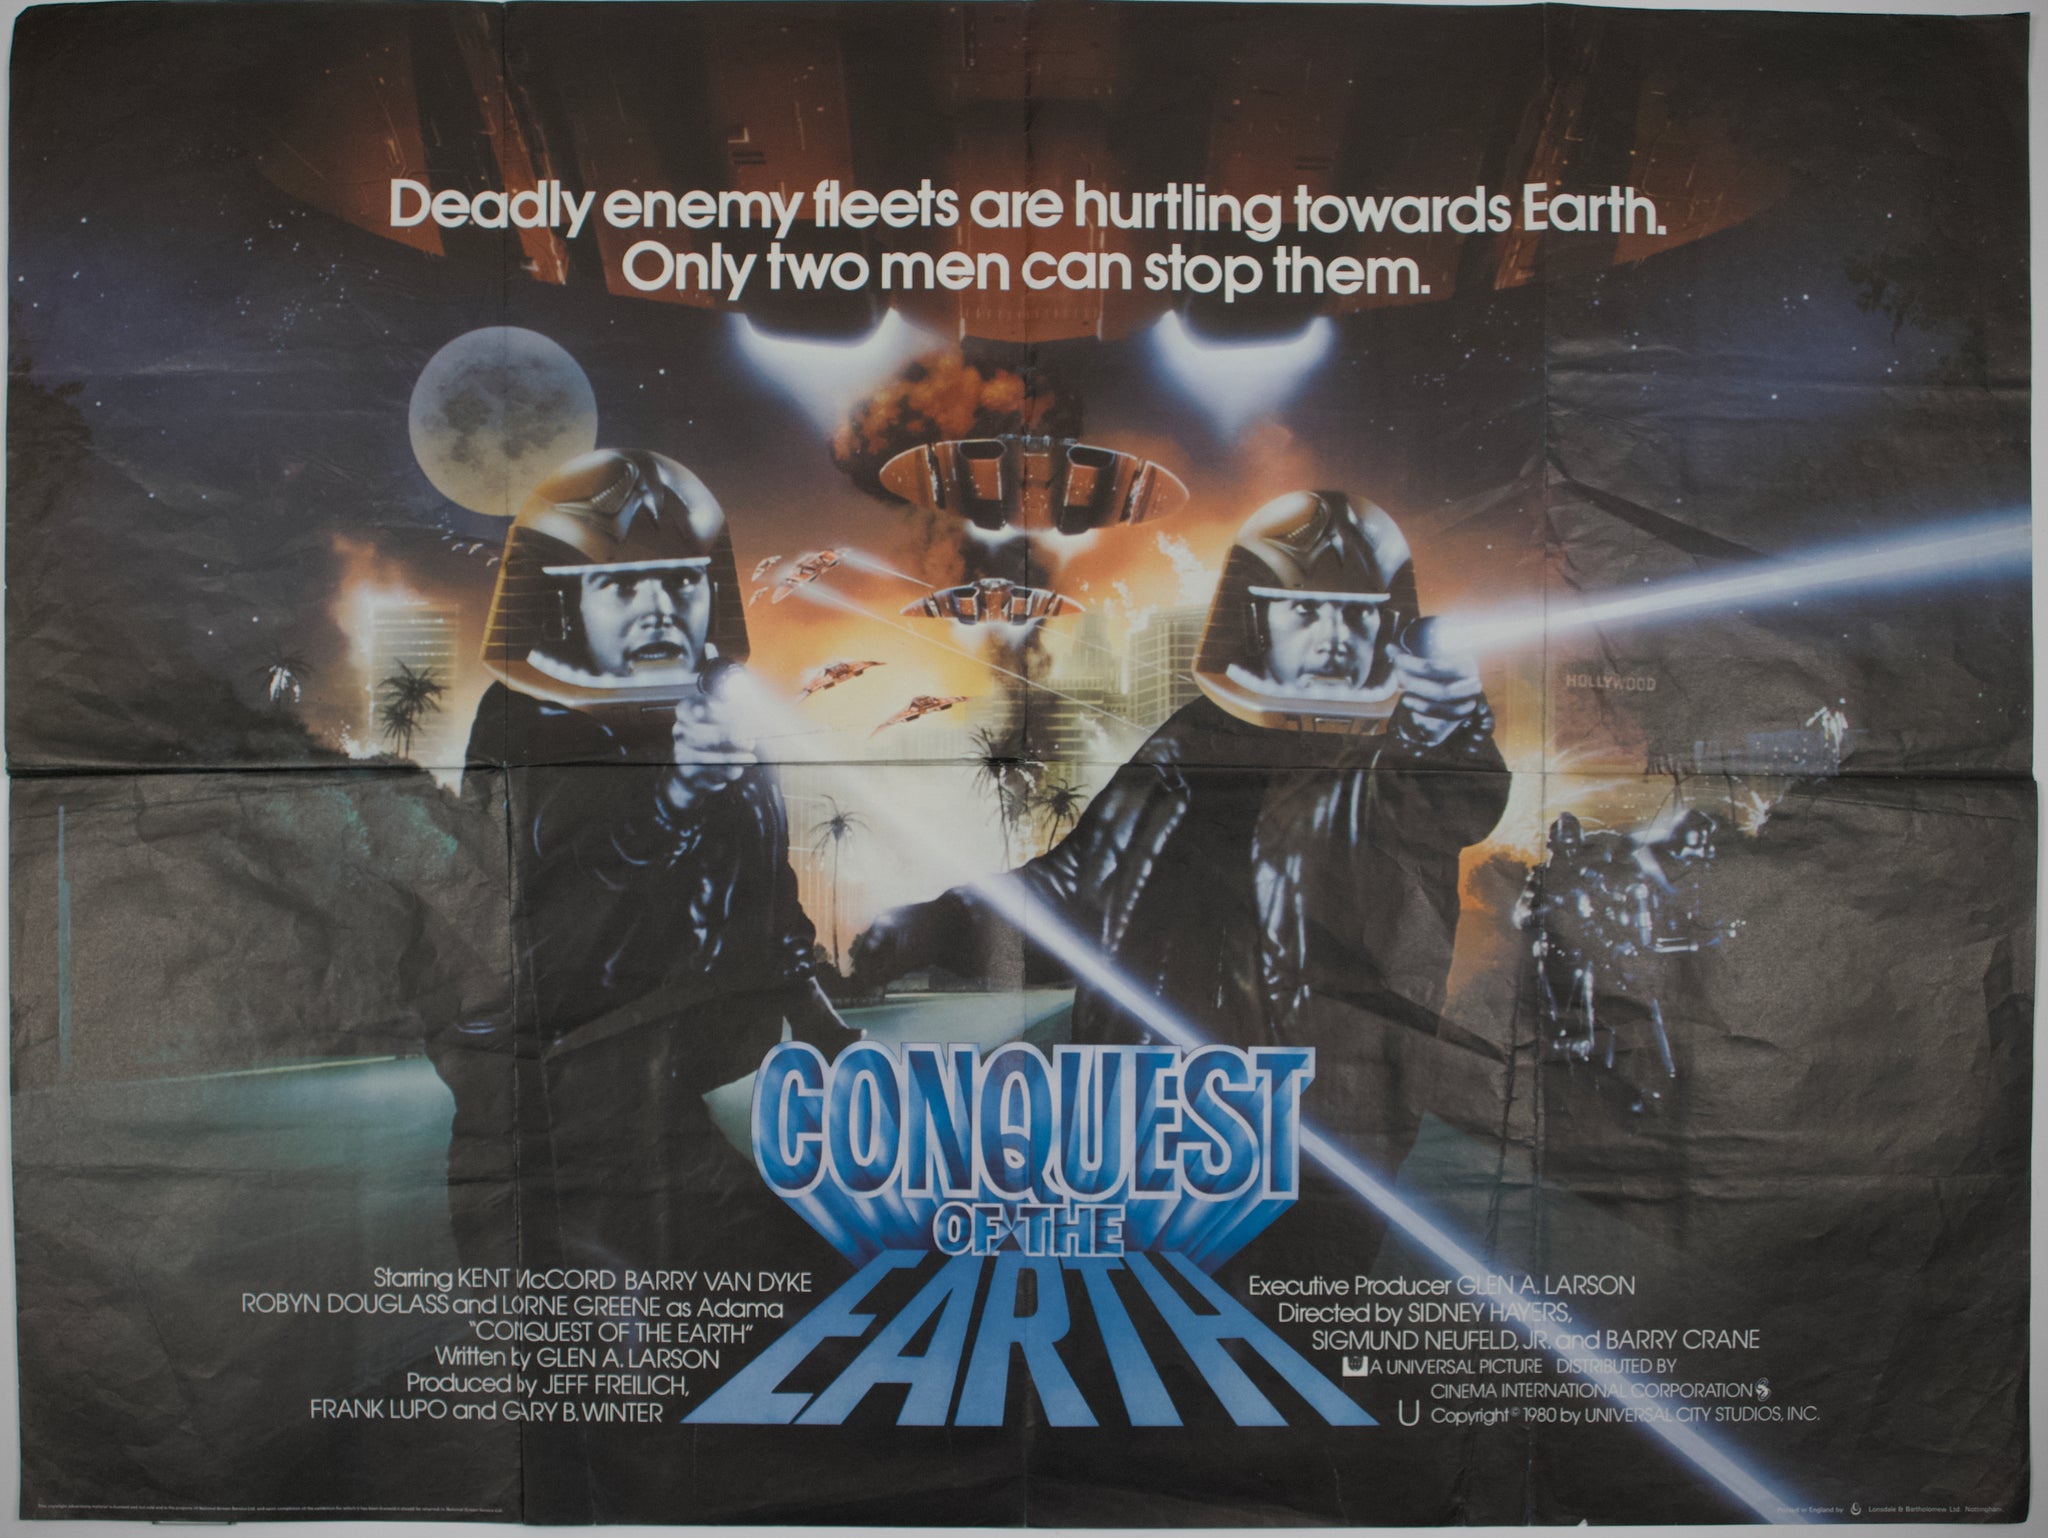 Conquest of the Earth - Battlestar Galactica III (1980) UK Quad Poster